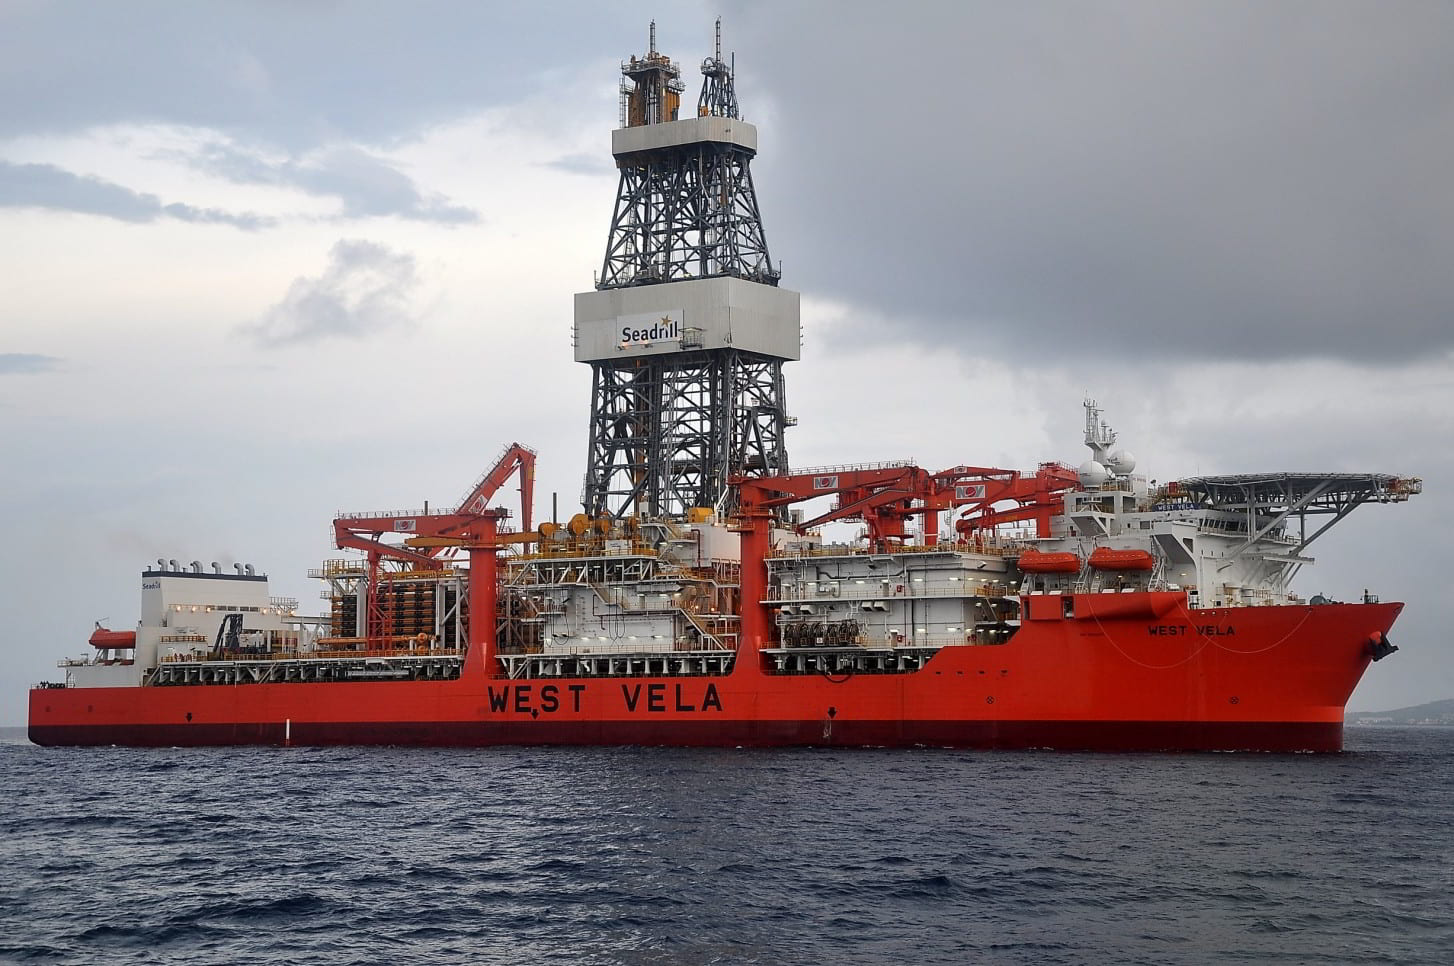 Drillship secures more work in U.S. Gulf of Mexico